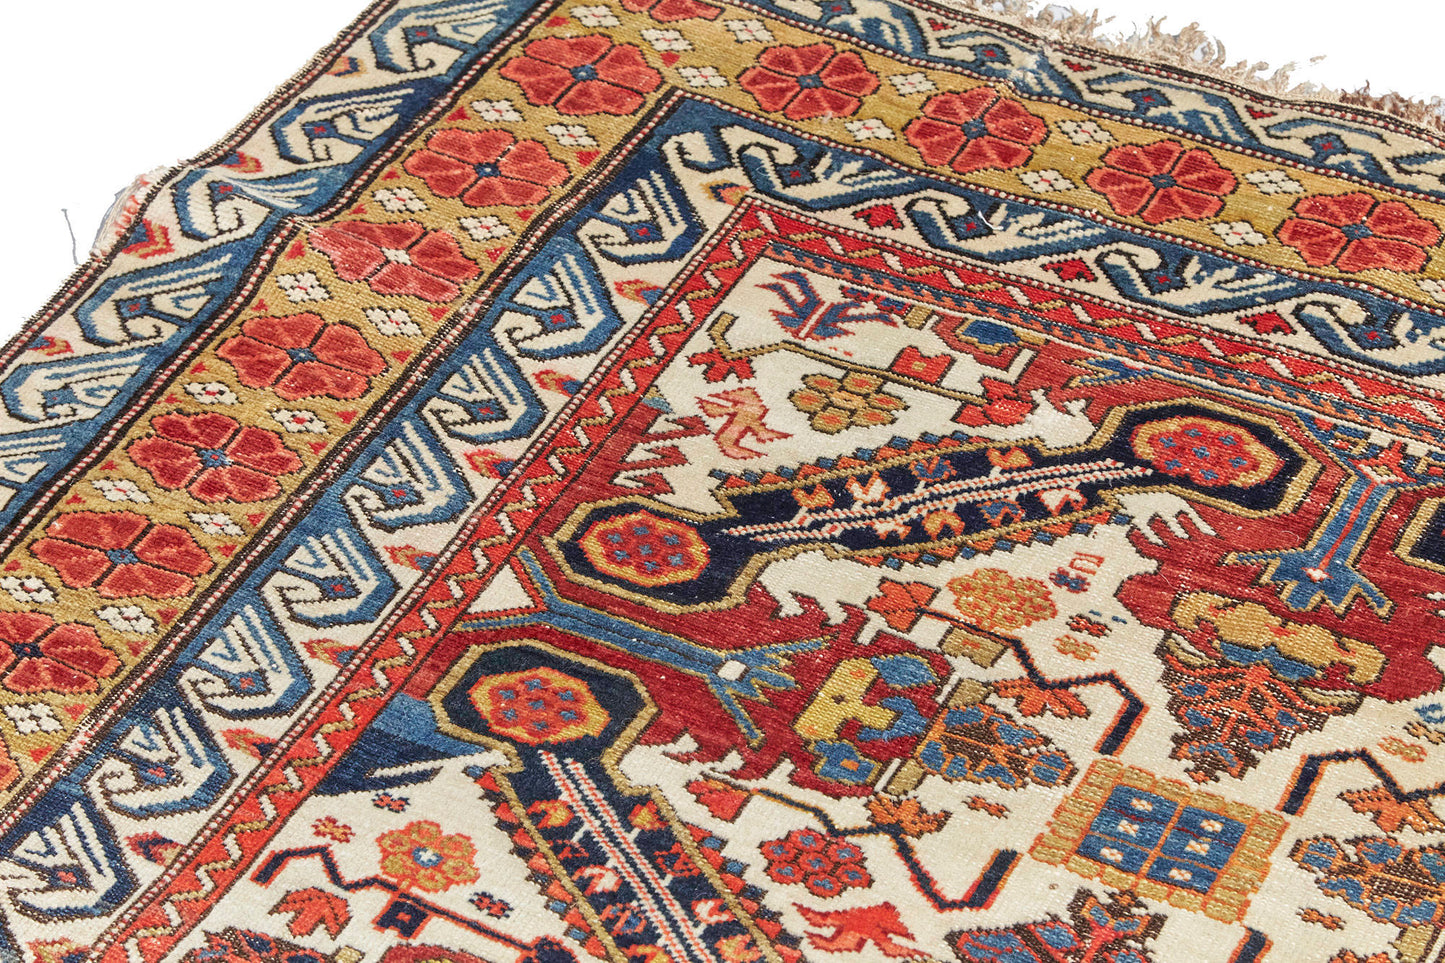 Exquisite, intricately woven Zeychour Persian rug. Vibrant red and deep blue medallions with floral motifs throughout and border with red flowers and blue and white wave pattern. Available from King Kennedy Rugs Los Angeles